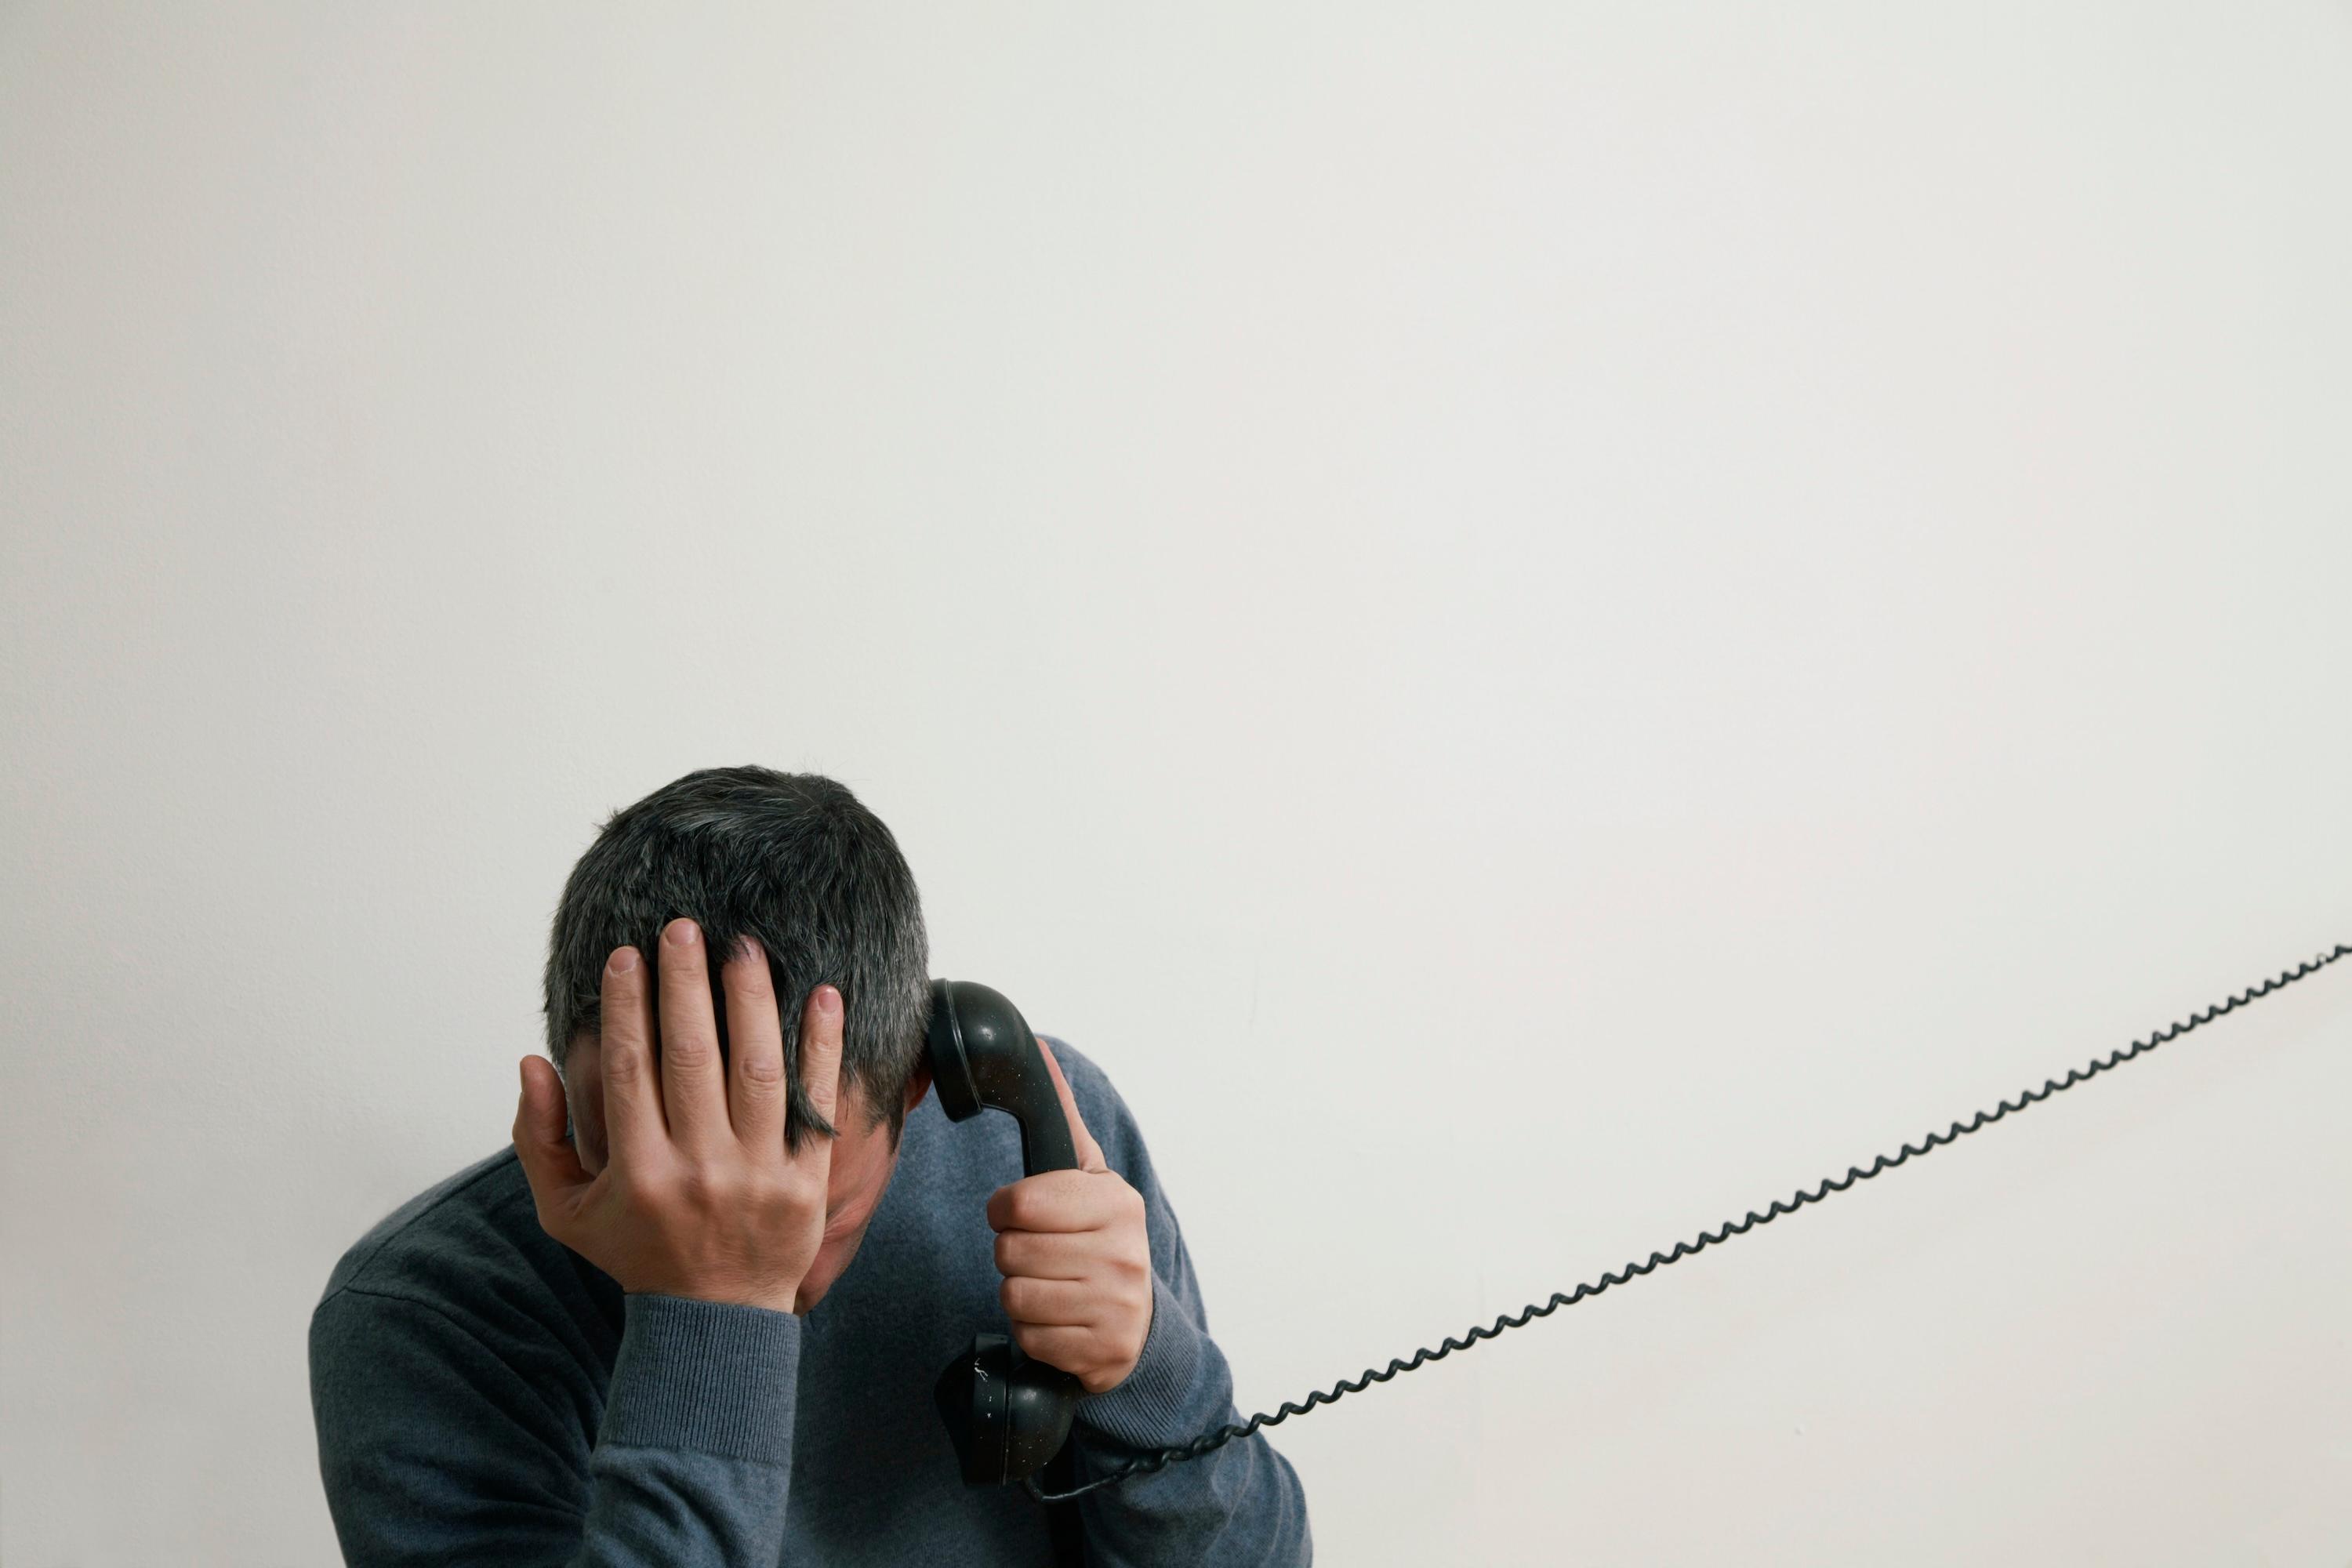 Man sitting on stairs using telephone, hand to head